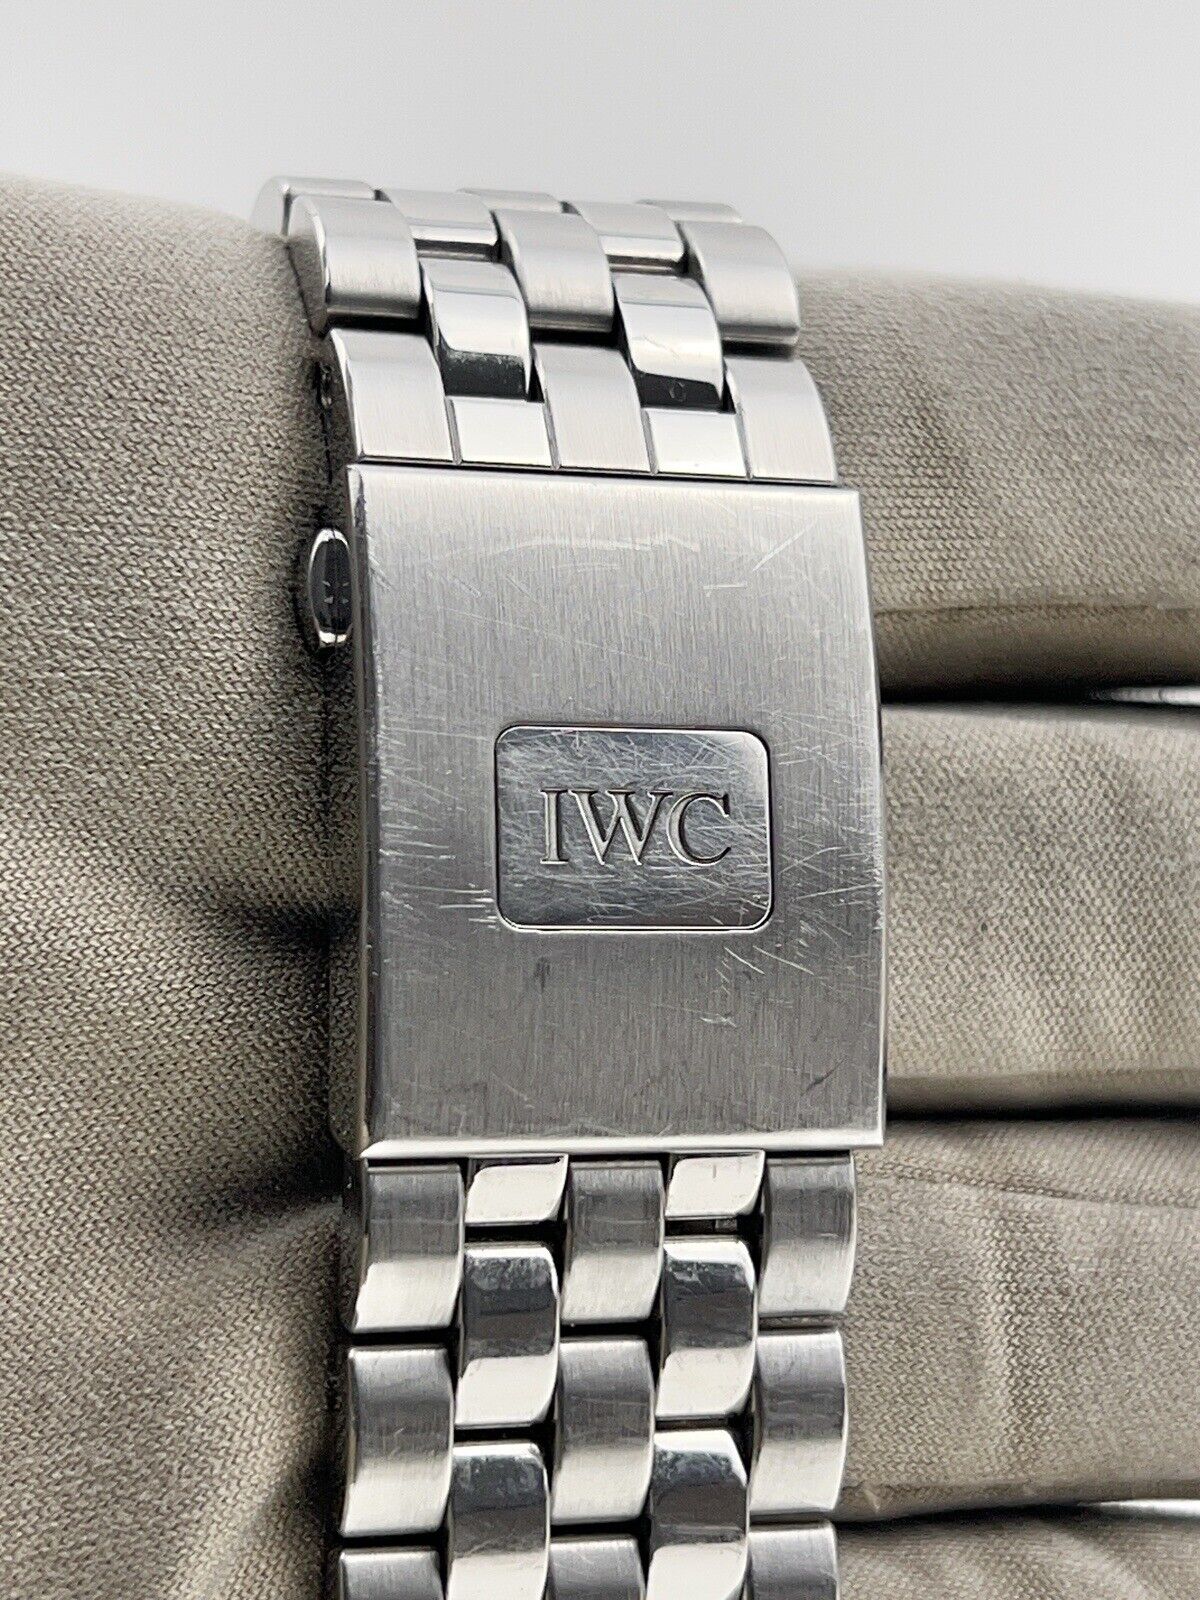 IWC Chronograph Stainless Steel Blue 43mm Automatic Men’s Watch IW377717